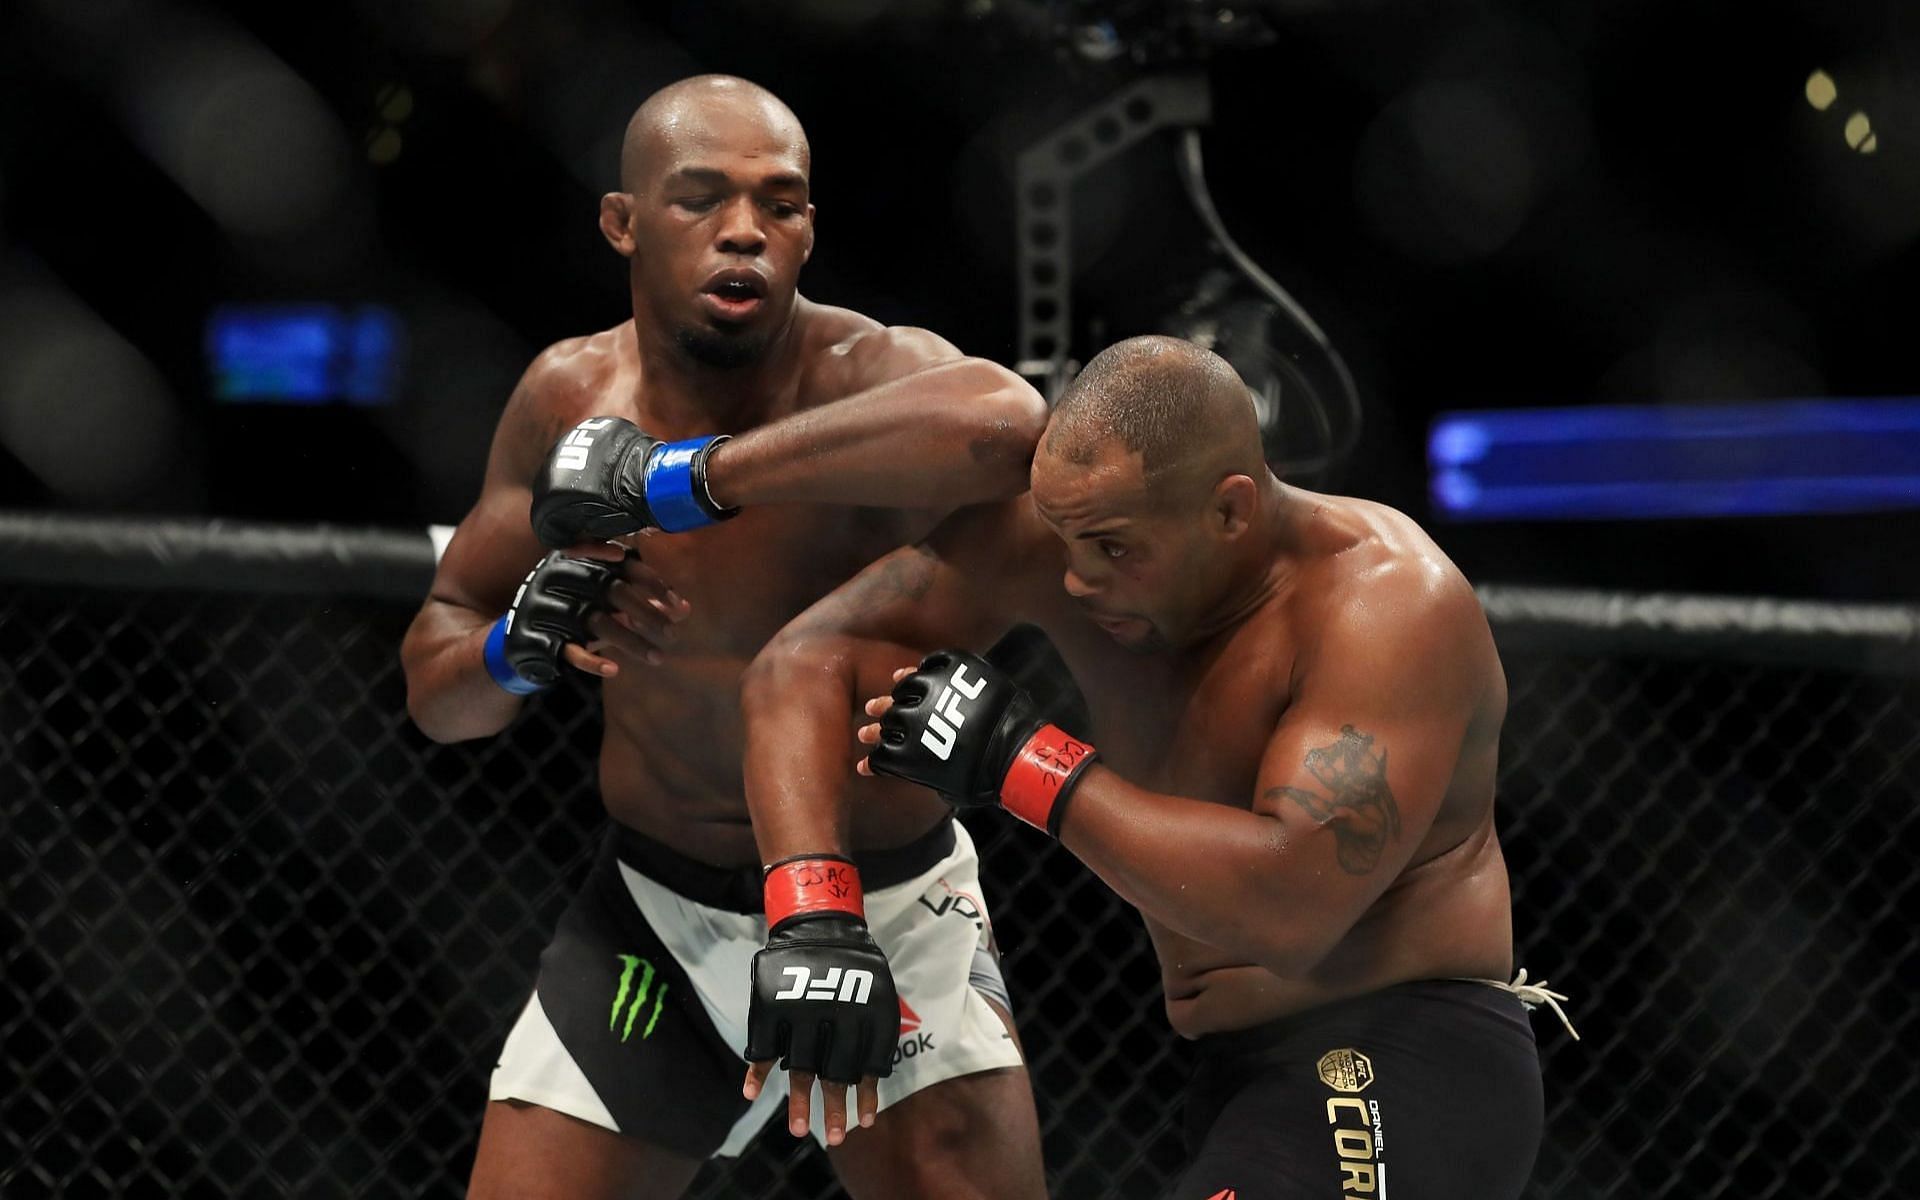 Daniel Cormier explains why he thinks Jon Jones will try and fail to lose the UFC heavyweight title